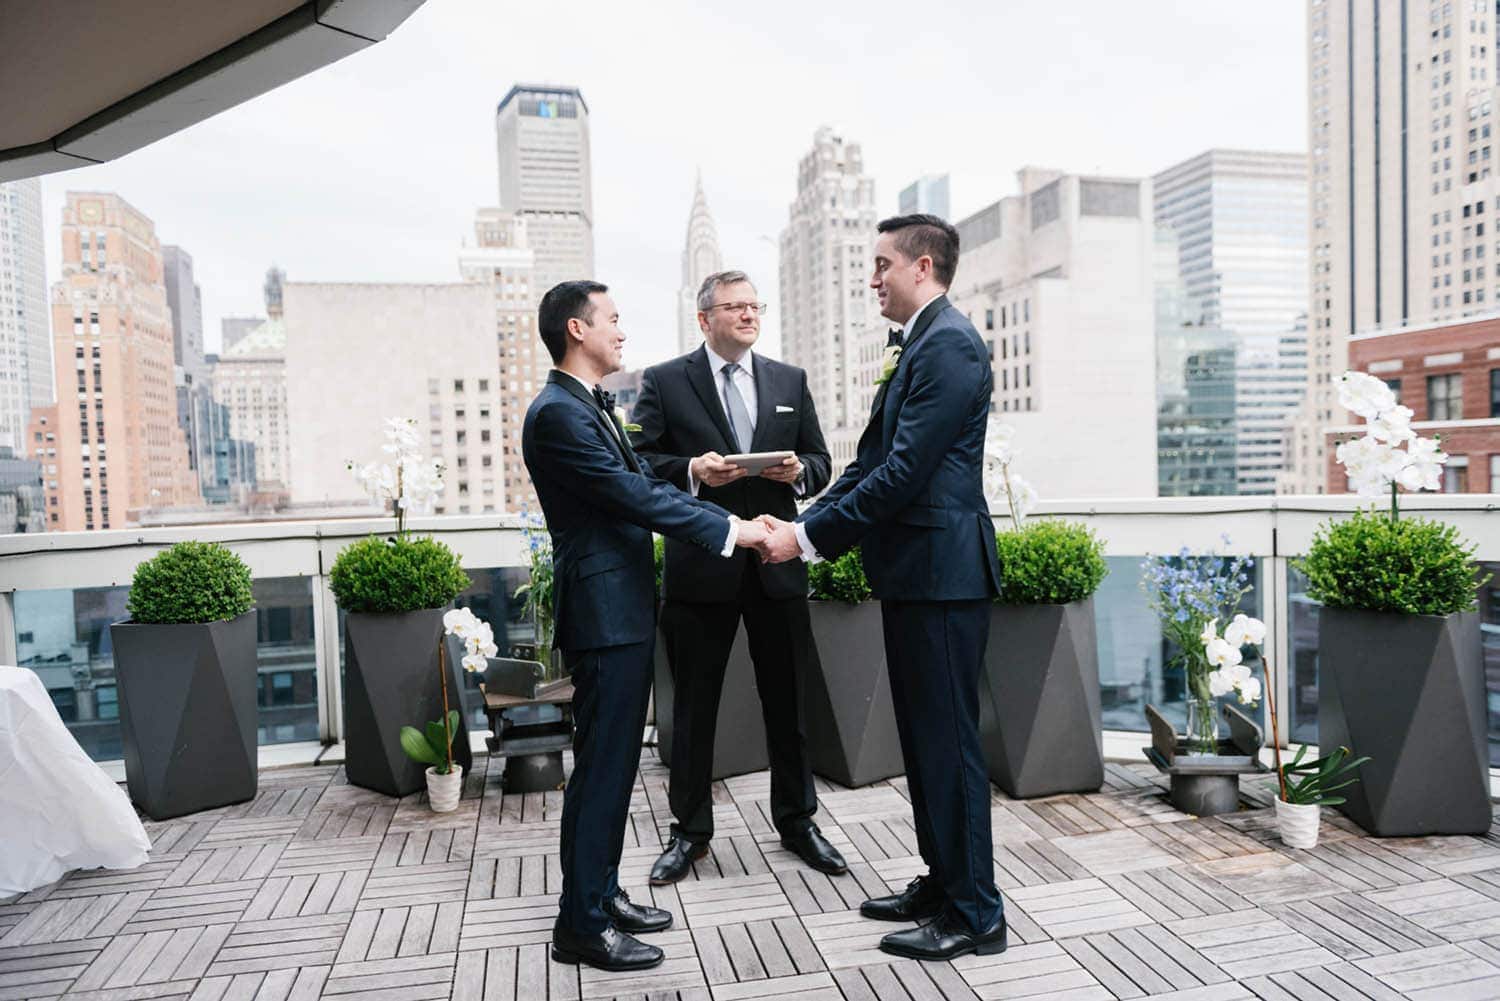 Where to elope in NYC: the best small wedding venues for New York elopements. Photos by NYC wedding photographer Everly Studios